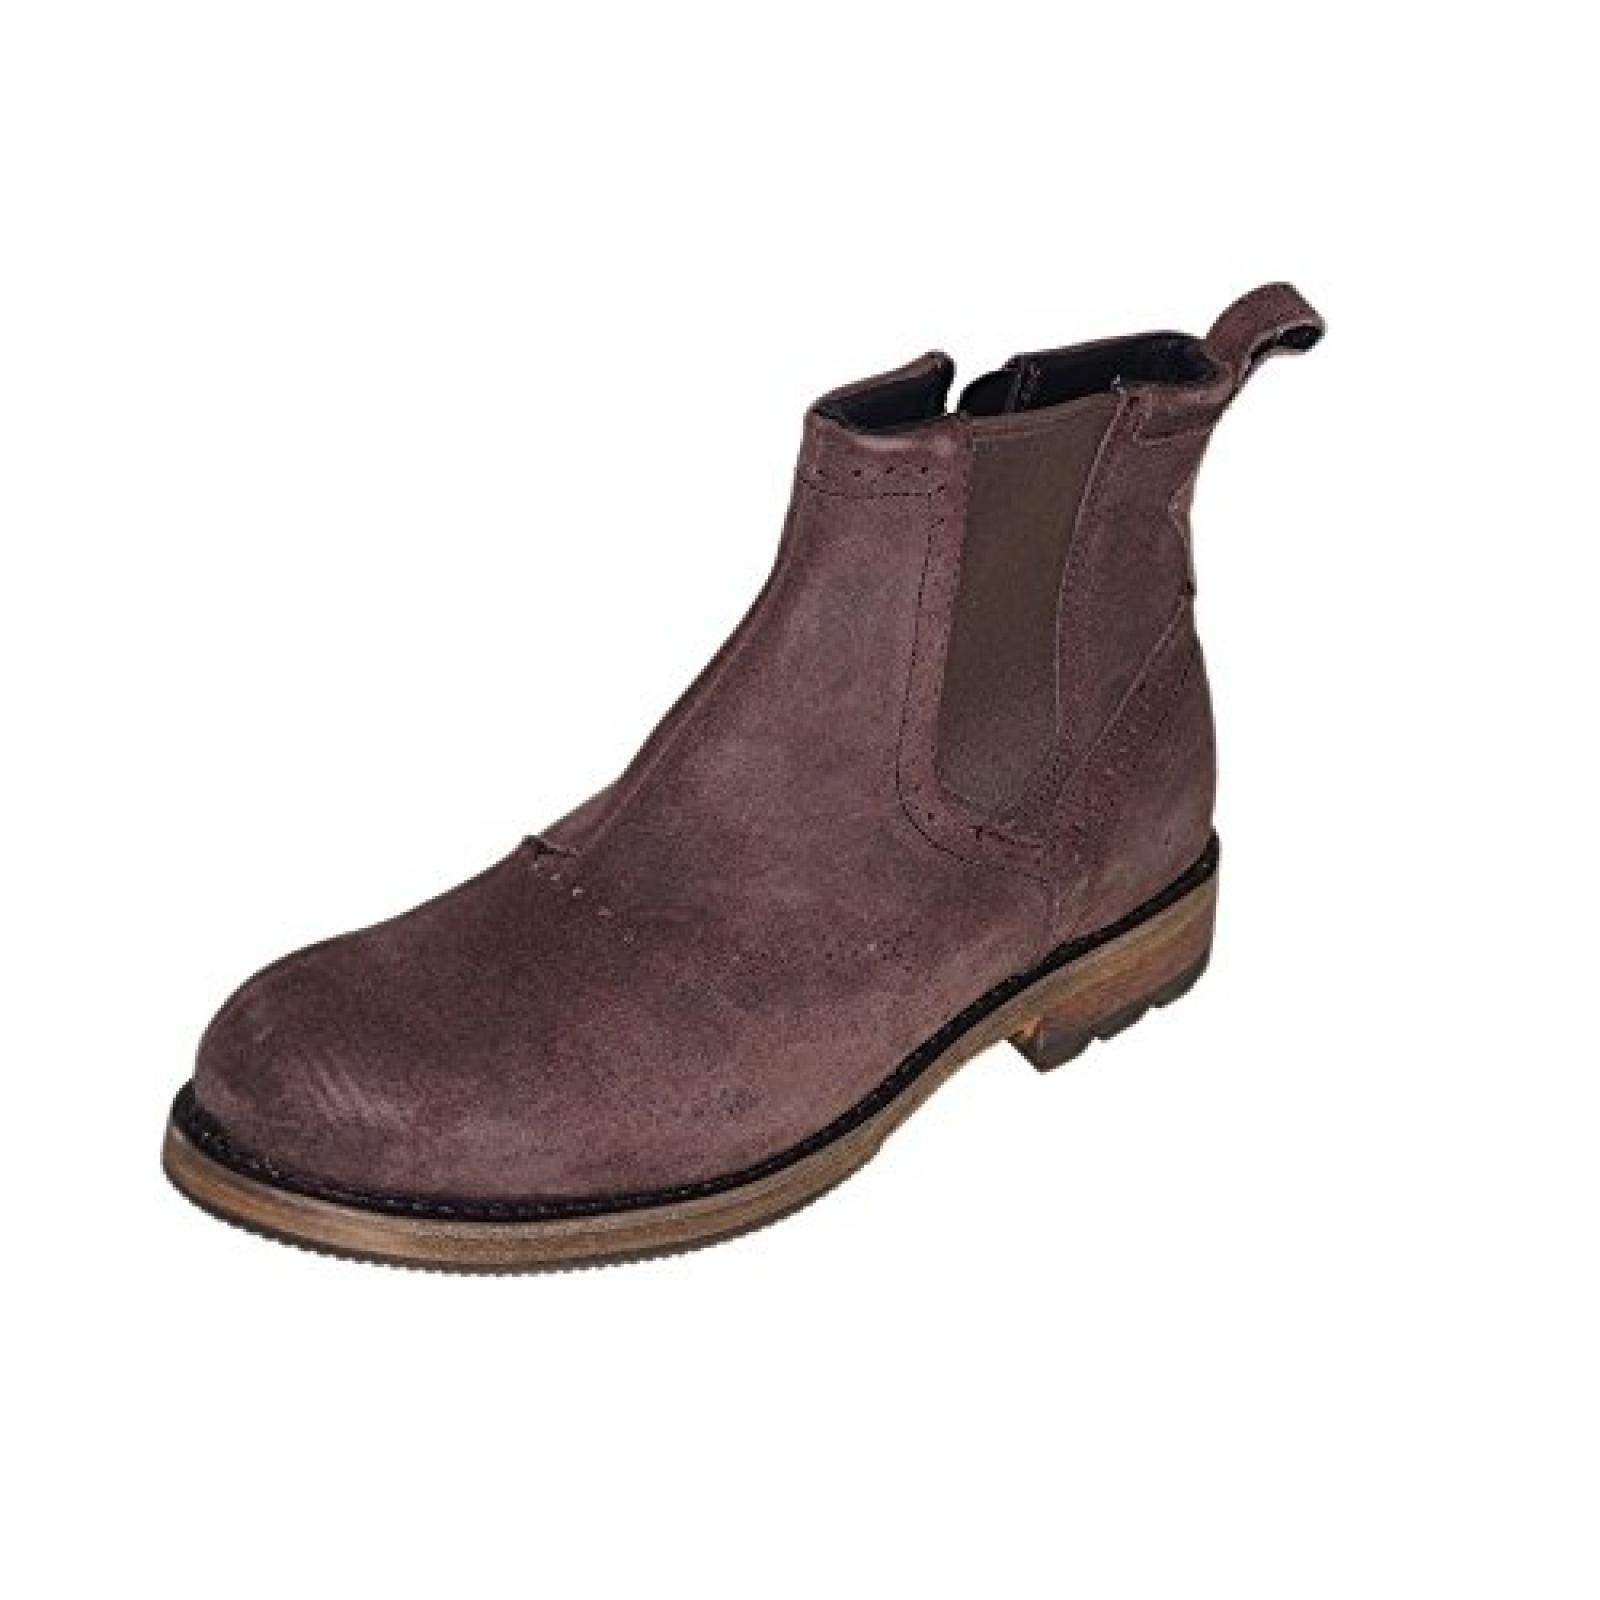 CAT FOOTWEAR Schuhe - Boots FITZ - antracite 